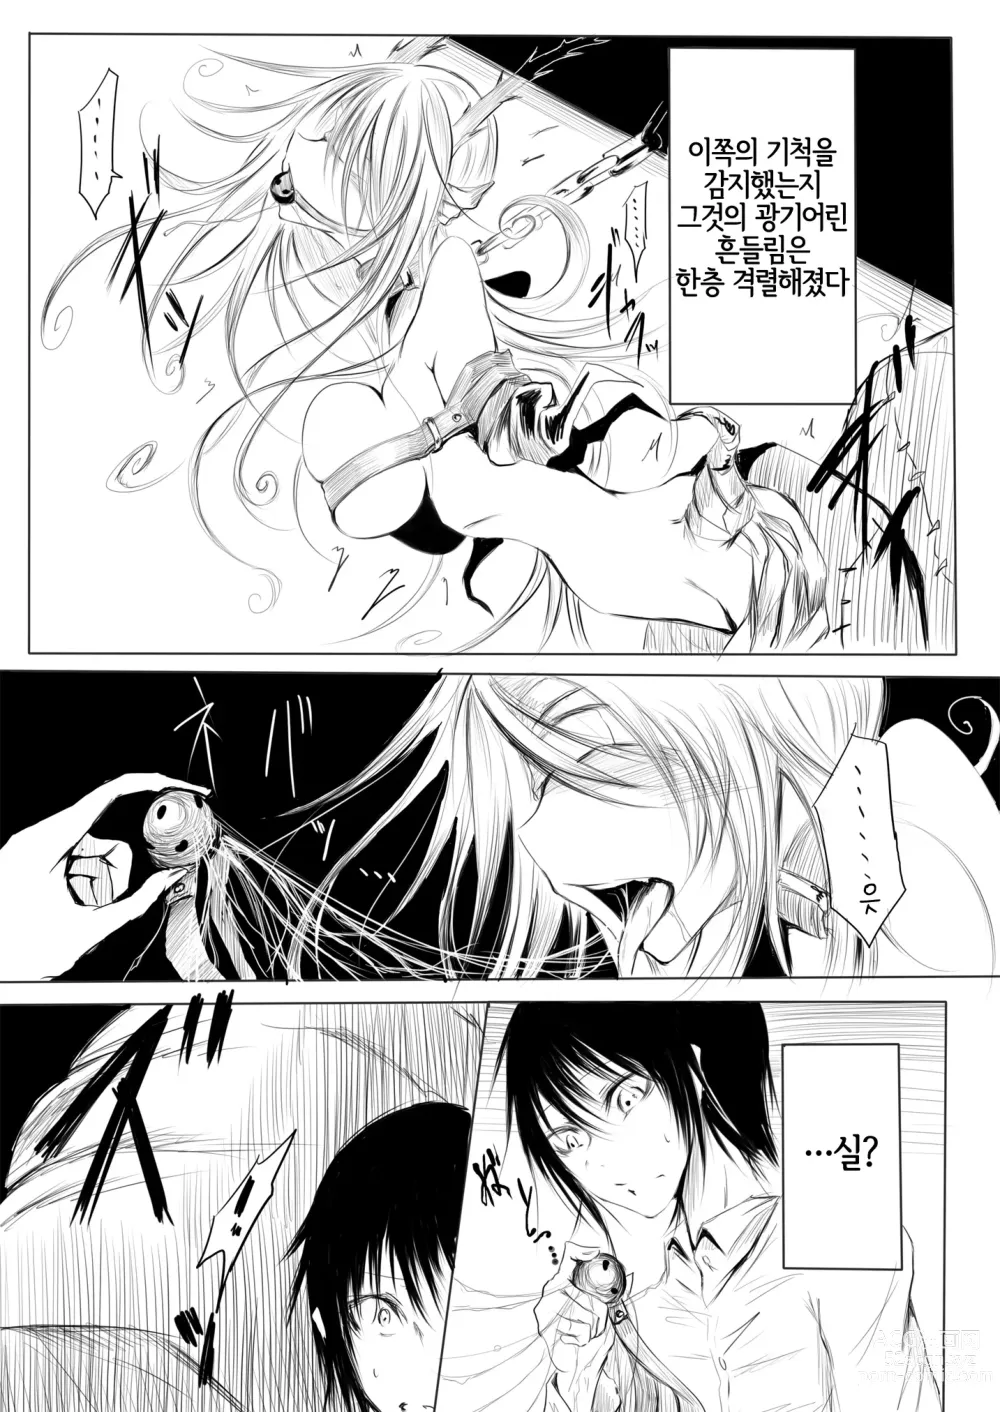 Page 4 of doujinshi A Reckless Worm Lady｜망양충